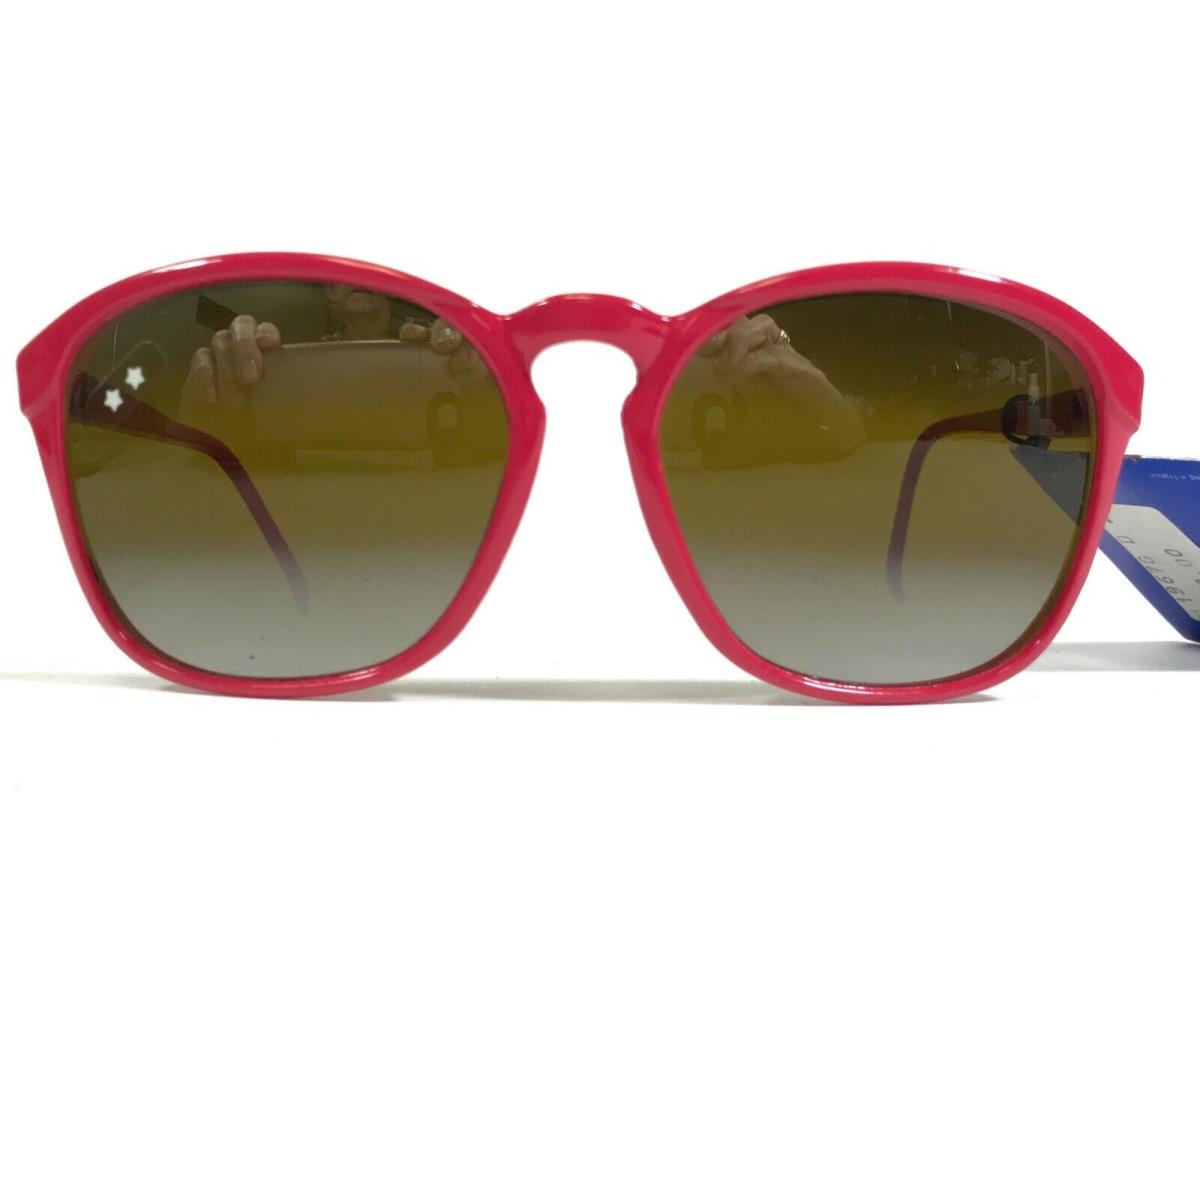 Vintage Cebe Sunglasses Red Pink Round Frames with Brown Lenses 55-16-125